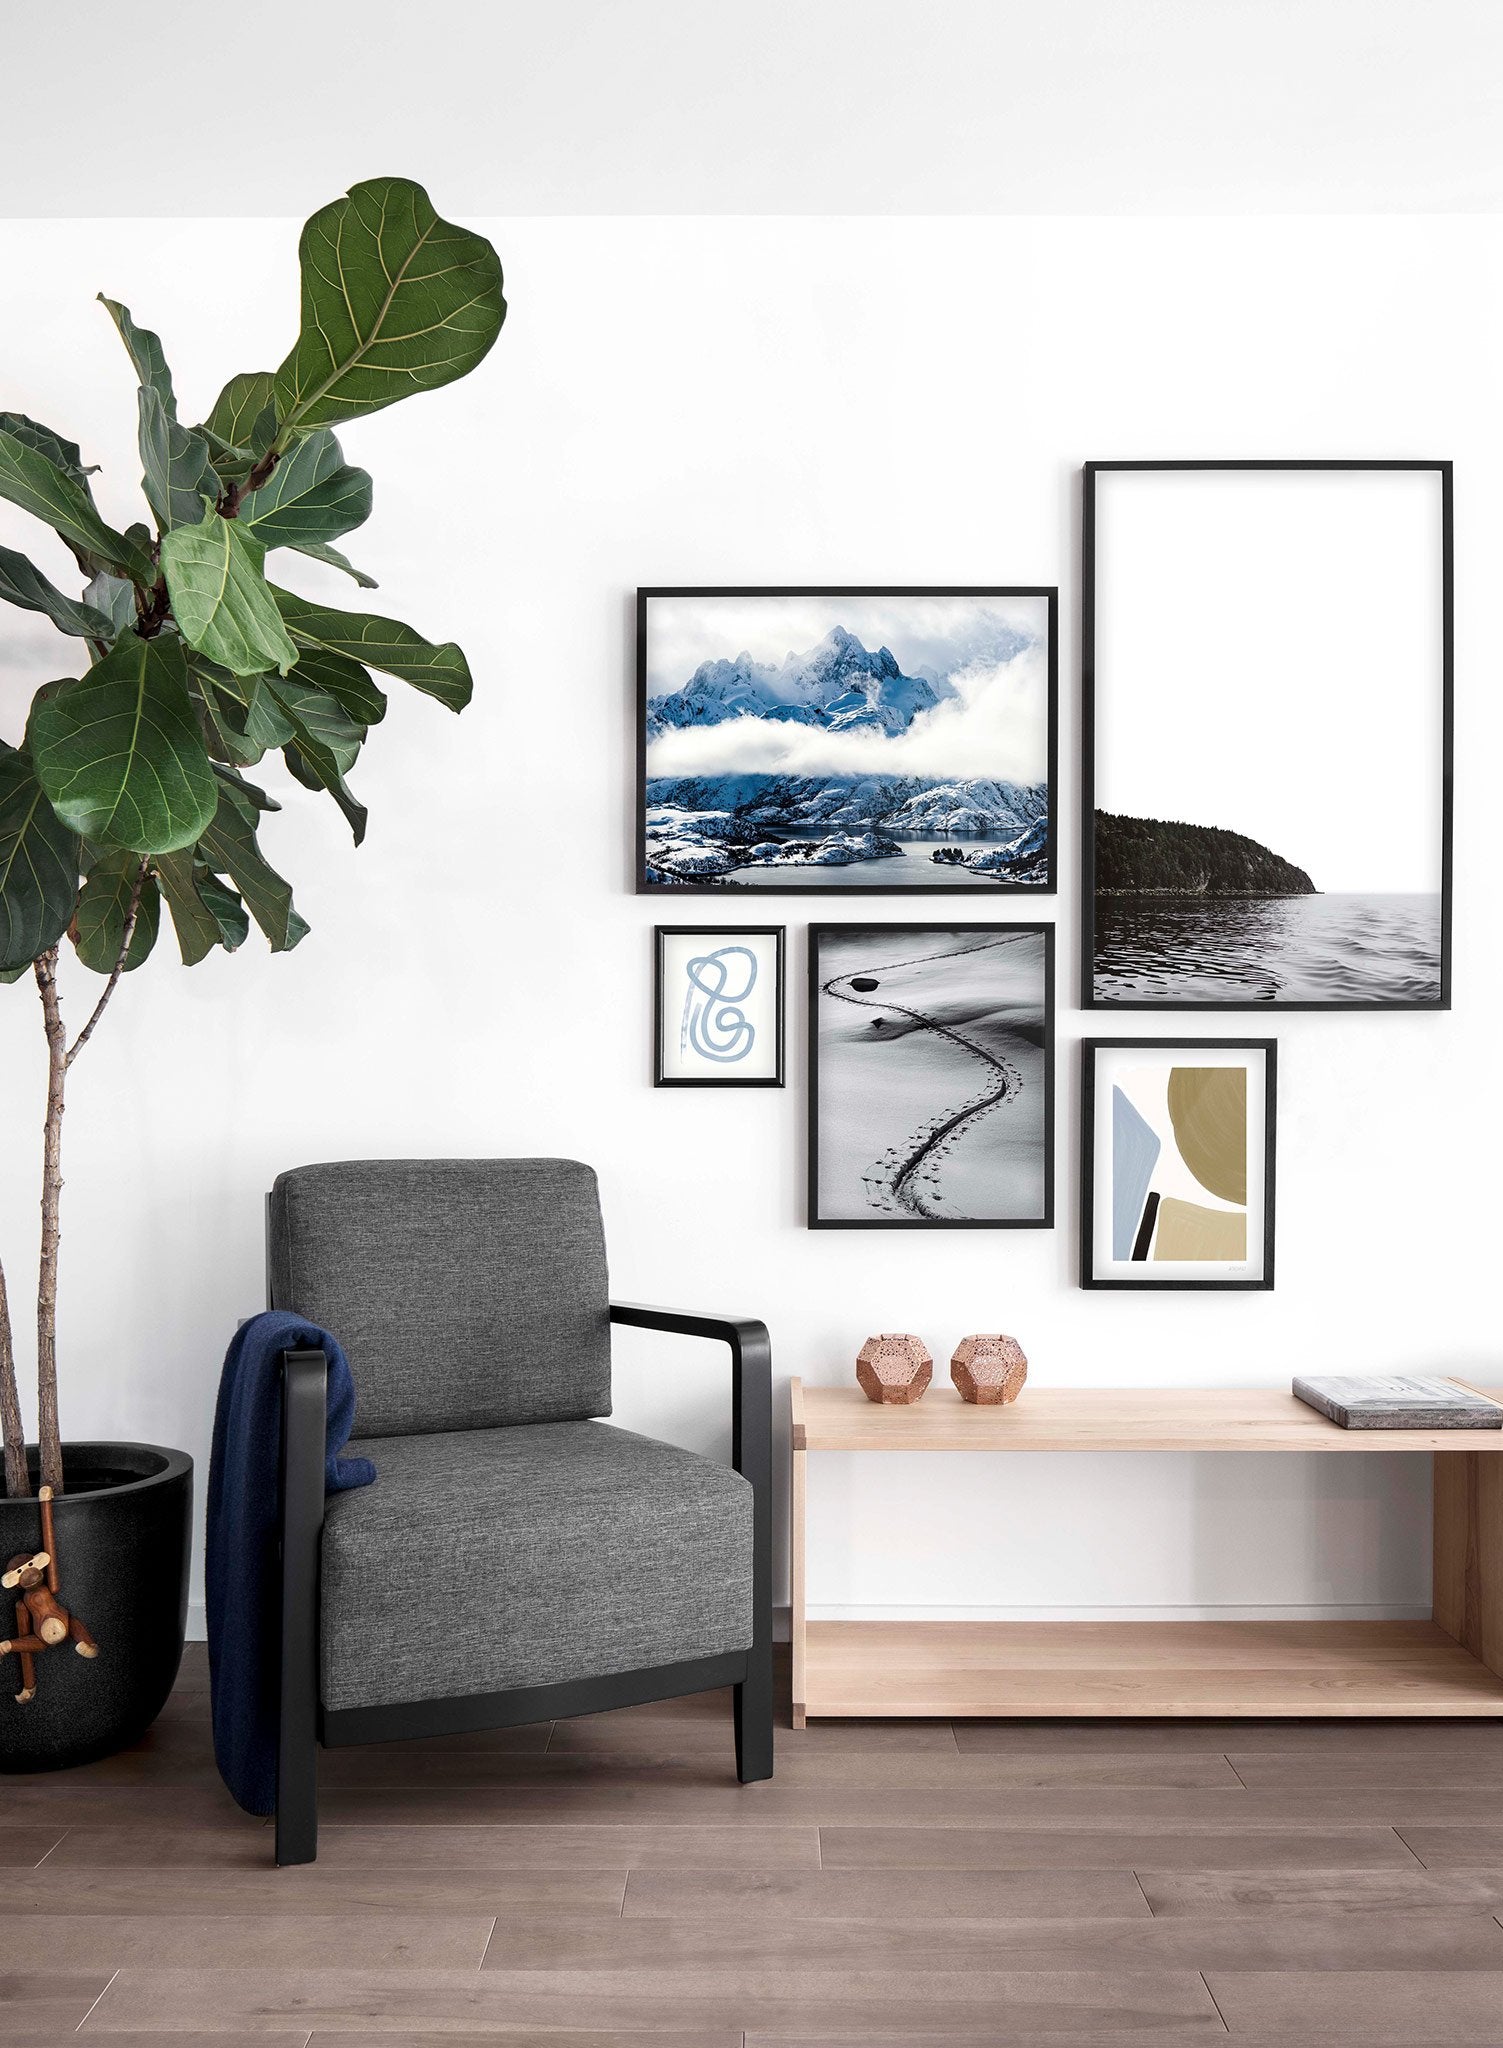 Landscape photography poster by Opposite Wall with mountain peaks - Lifestyle Gallery - Living Room